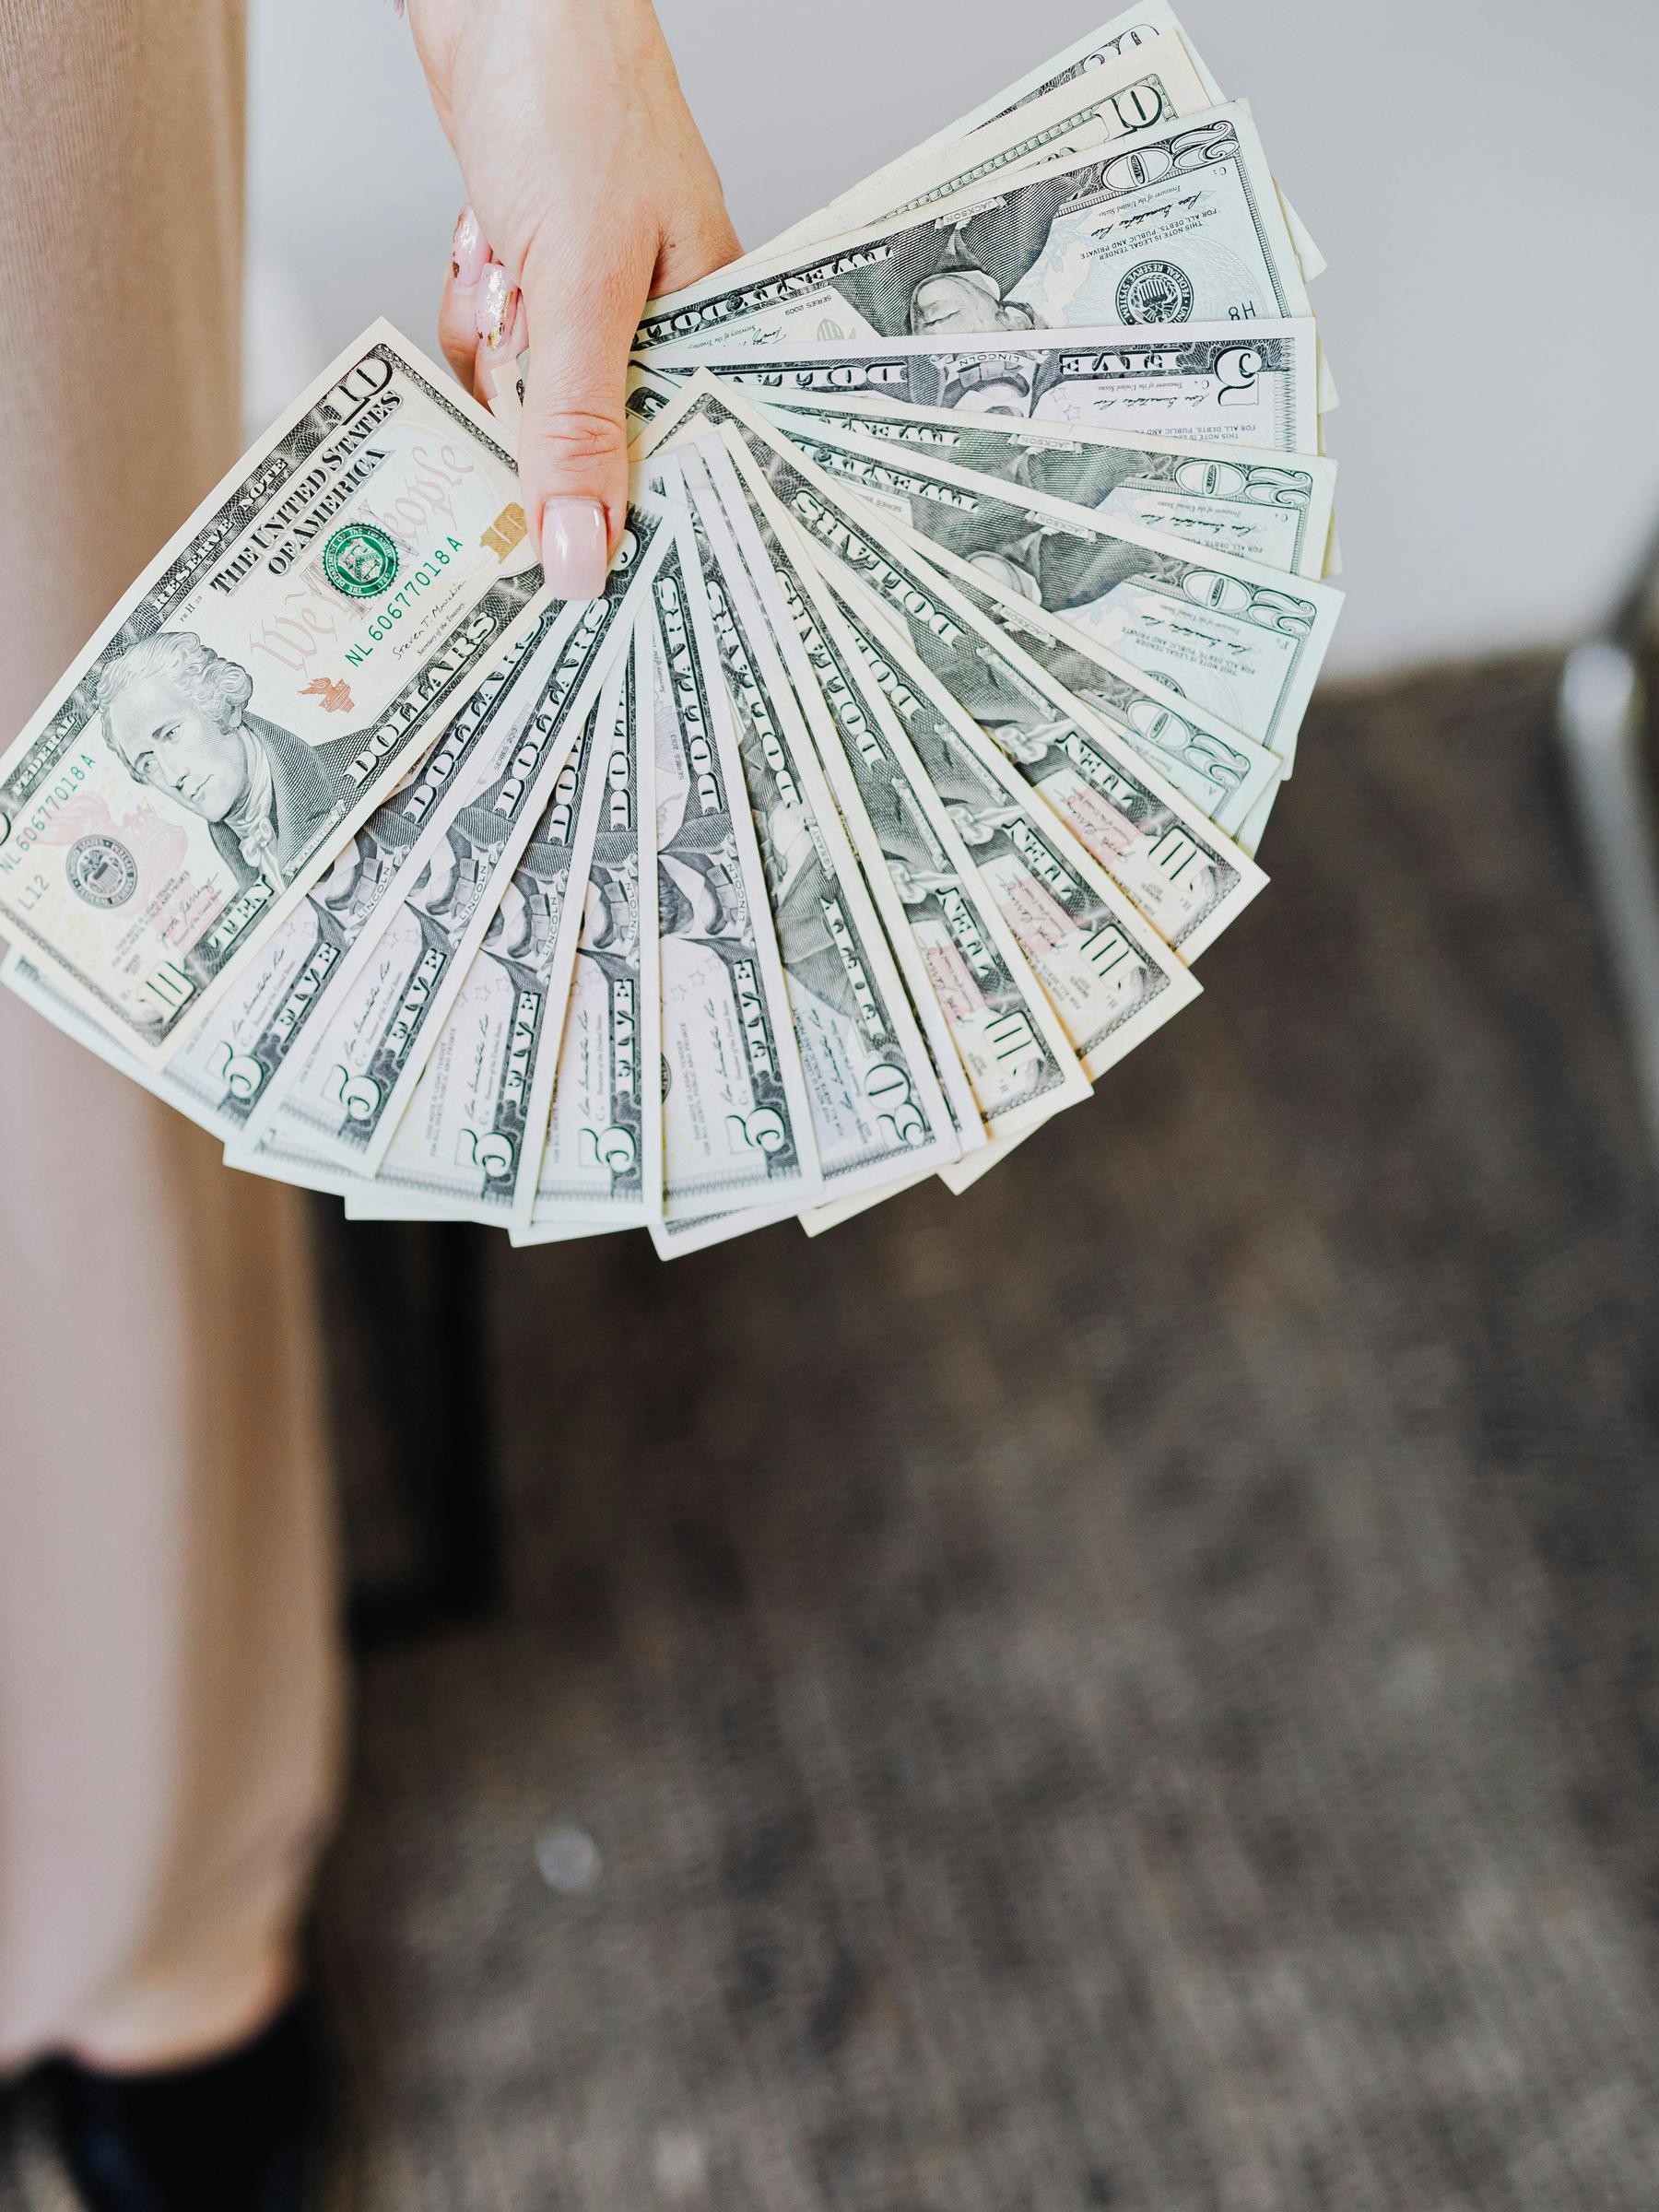 The woman secretly places a wad of cash under a seat, planning her next move | Source: Pexels